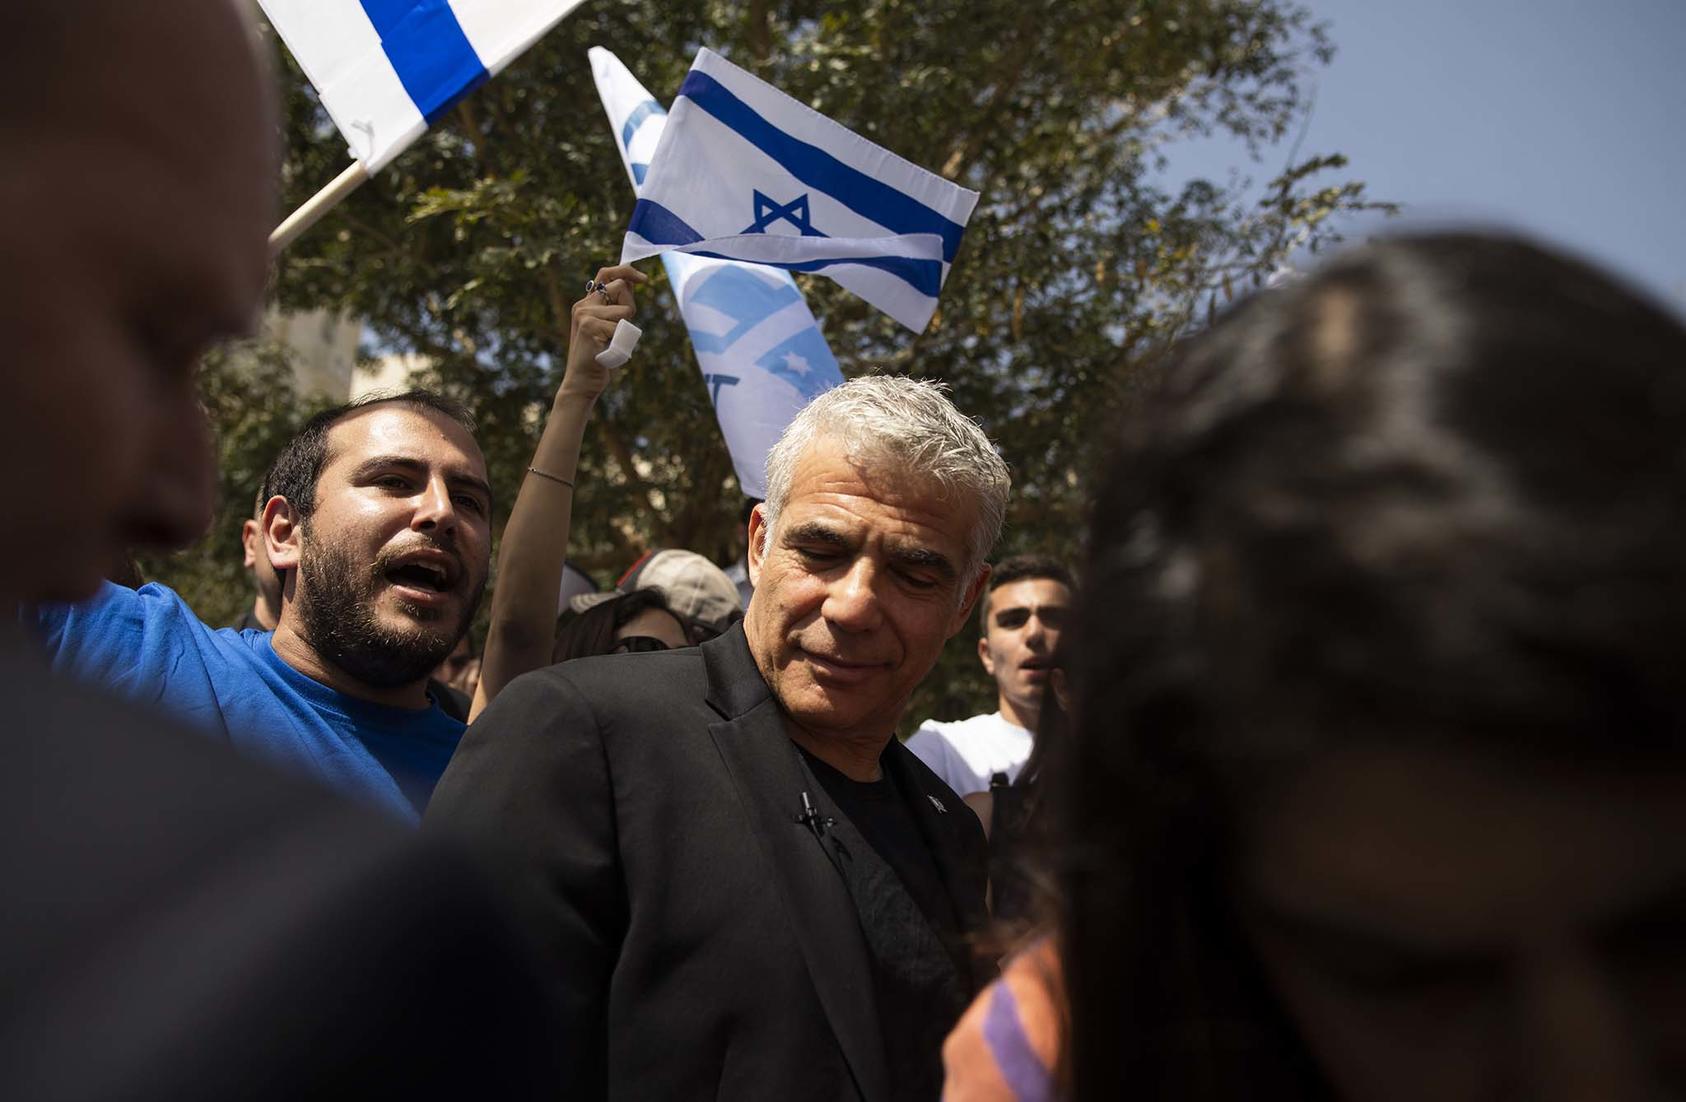 Yair Lapid, the leader of the centrist Yesh Atid party, was able to form a coalition of disparate parties that could potentially stave off Israel’s fifth election in two years and usher in a new era in Israeli politics. (Dan Balilty/The New York Times)